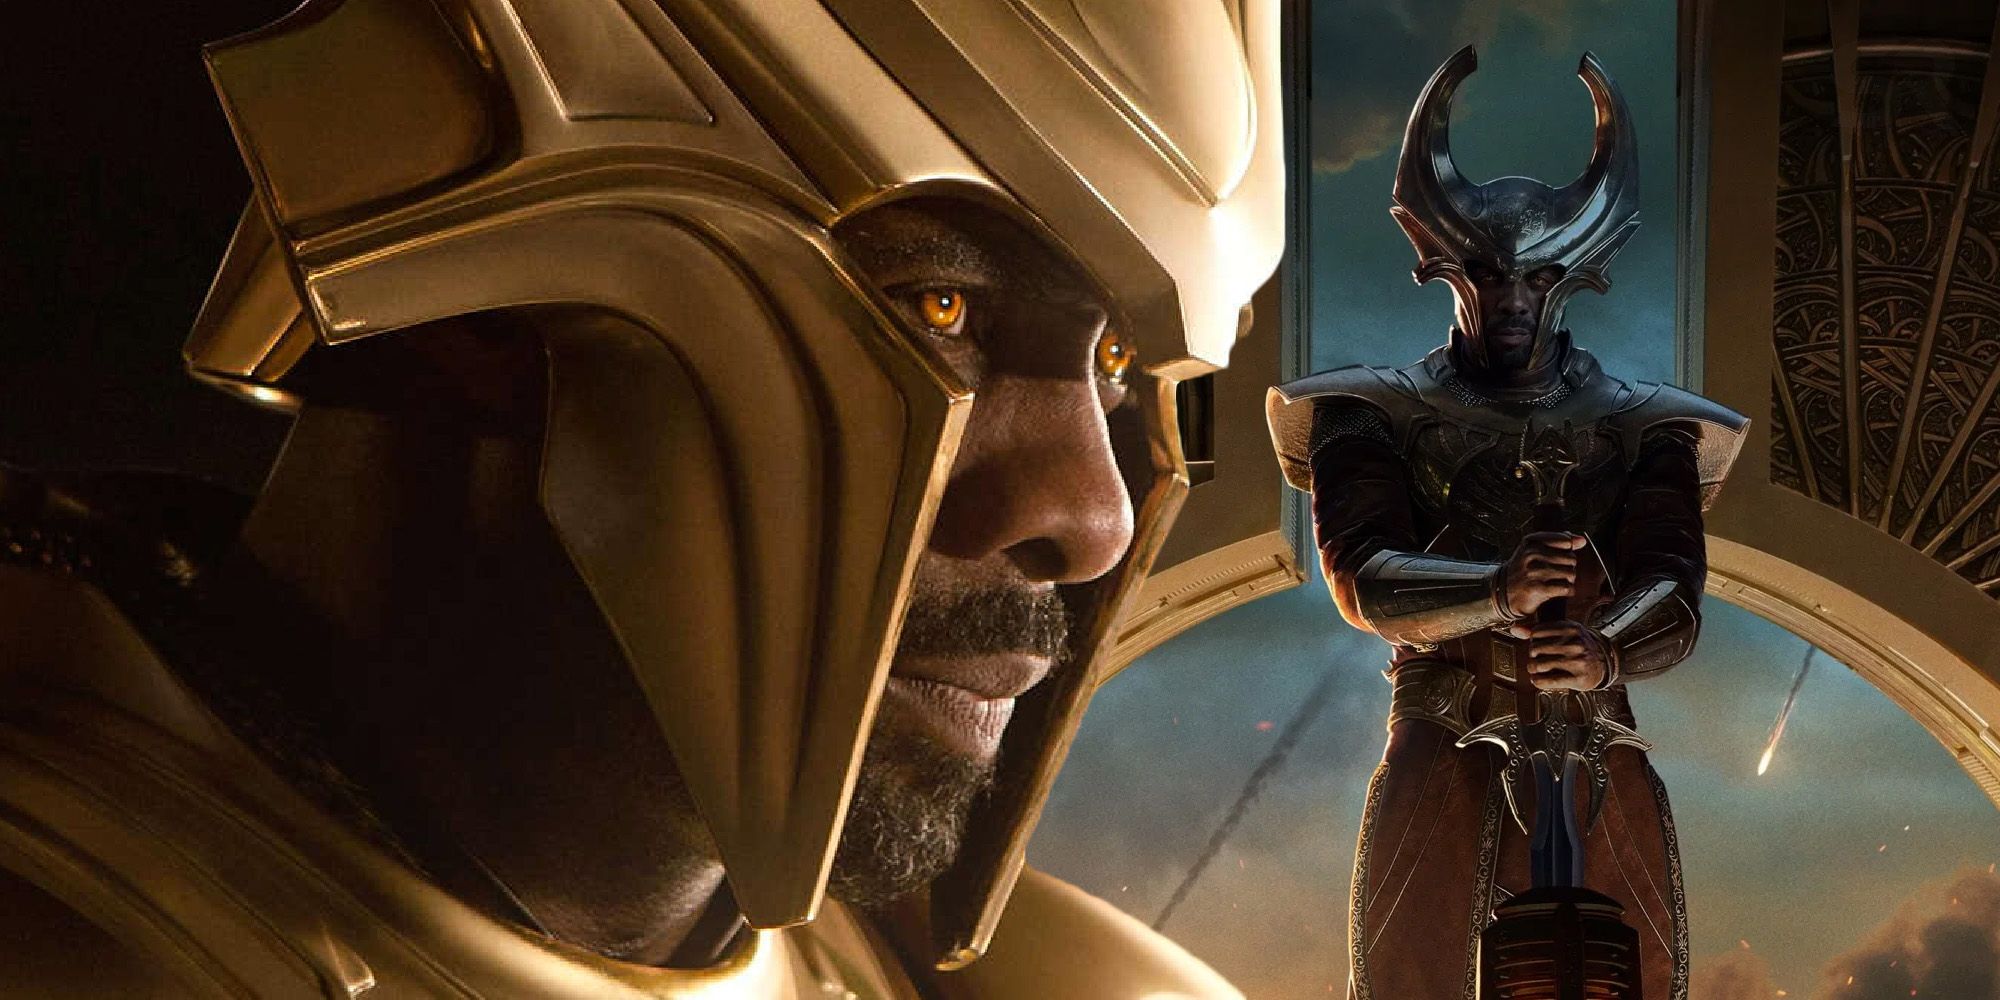 Gamers React to Thor Confronting Heimdall